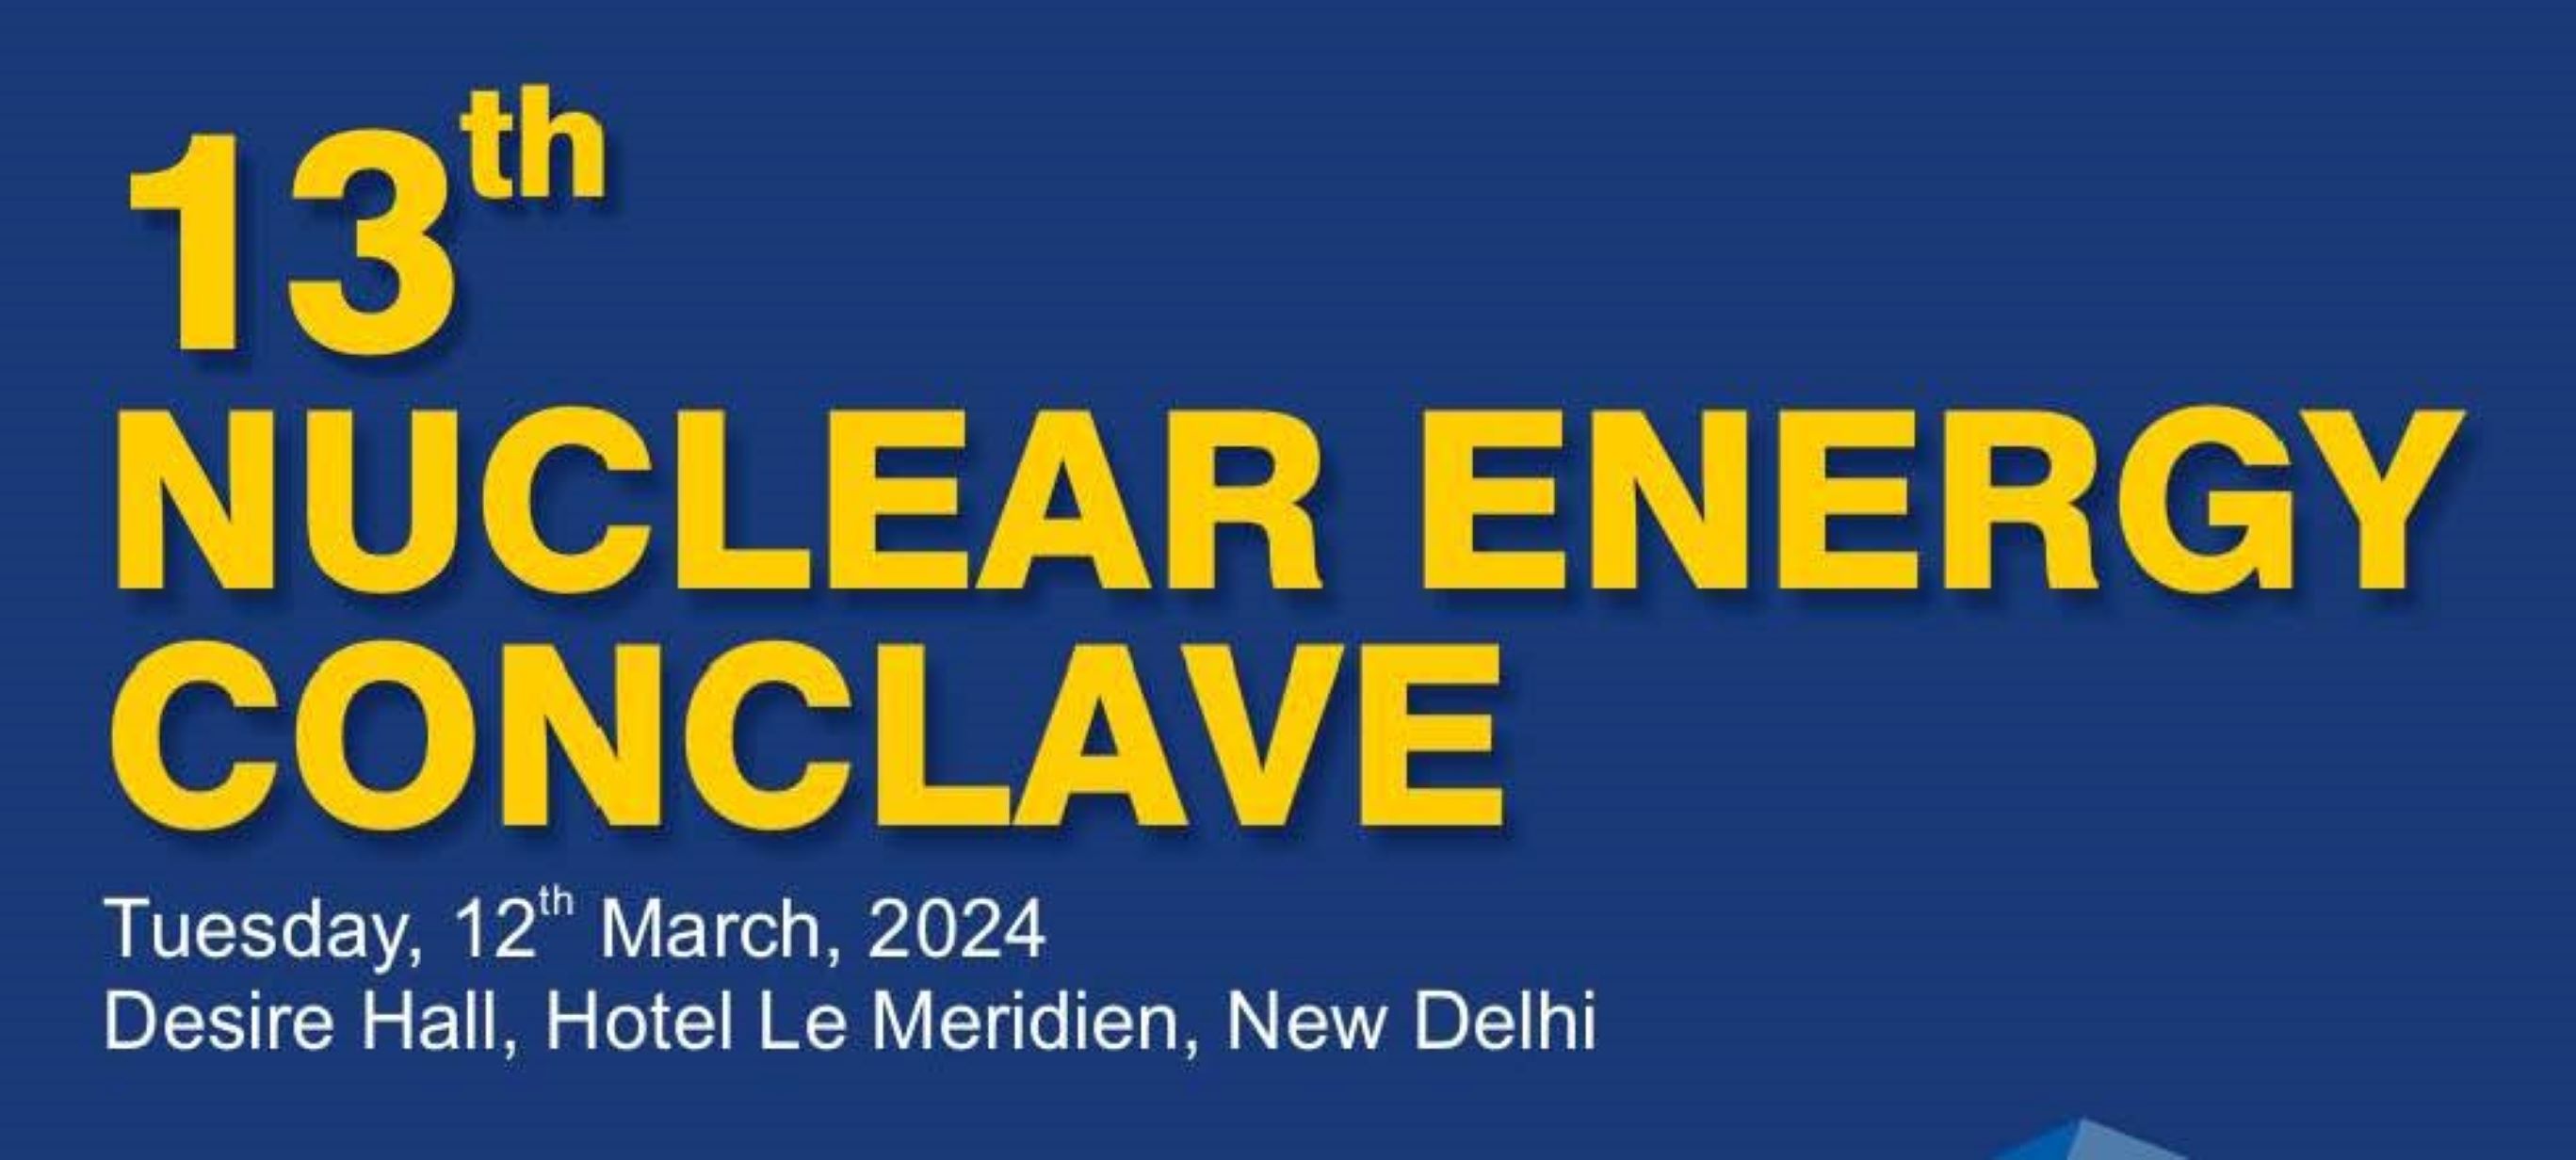 13th NUCLEAR ENERGY CONCLAVE